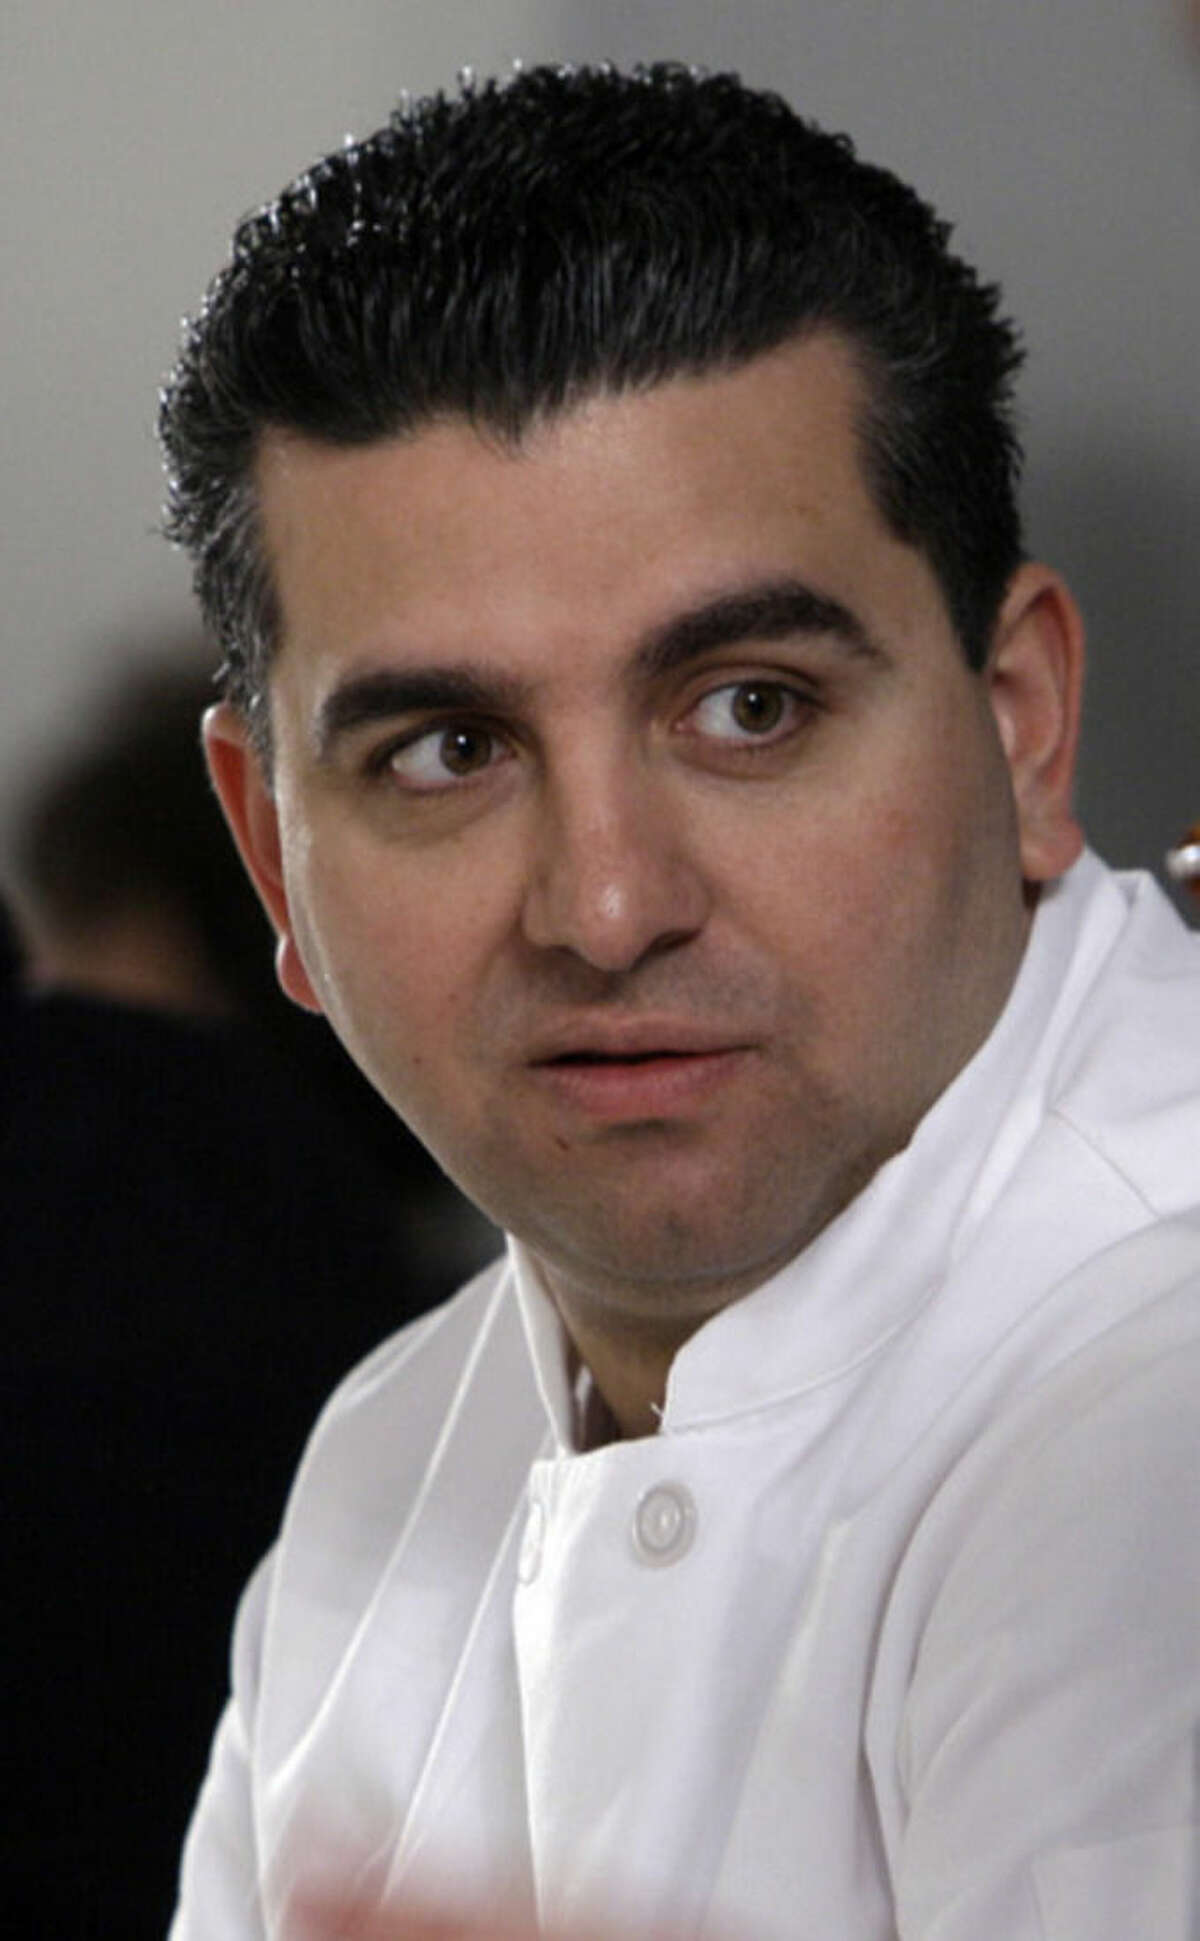 FILE - In this Feb. 17, 2011 file photo, Buddy Valastro attends the presentation of the fall 2011 collection of designer Isaac Mizrahi during Fashion Week in New York. The New York Police Department says “Cake Boss” Buddy Valastro was arrested, Thursday, Nov. 13, 2014 on a charge of Driving While Intoxicated after being pulled over for driving erratically in Manhattan. (AP Photo/Richard Drew, File)